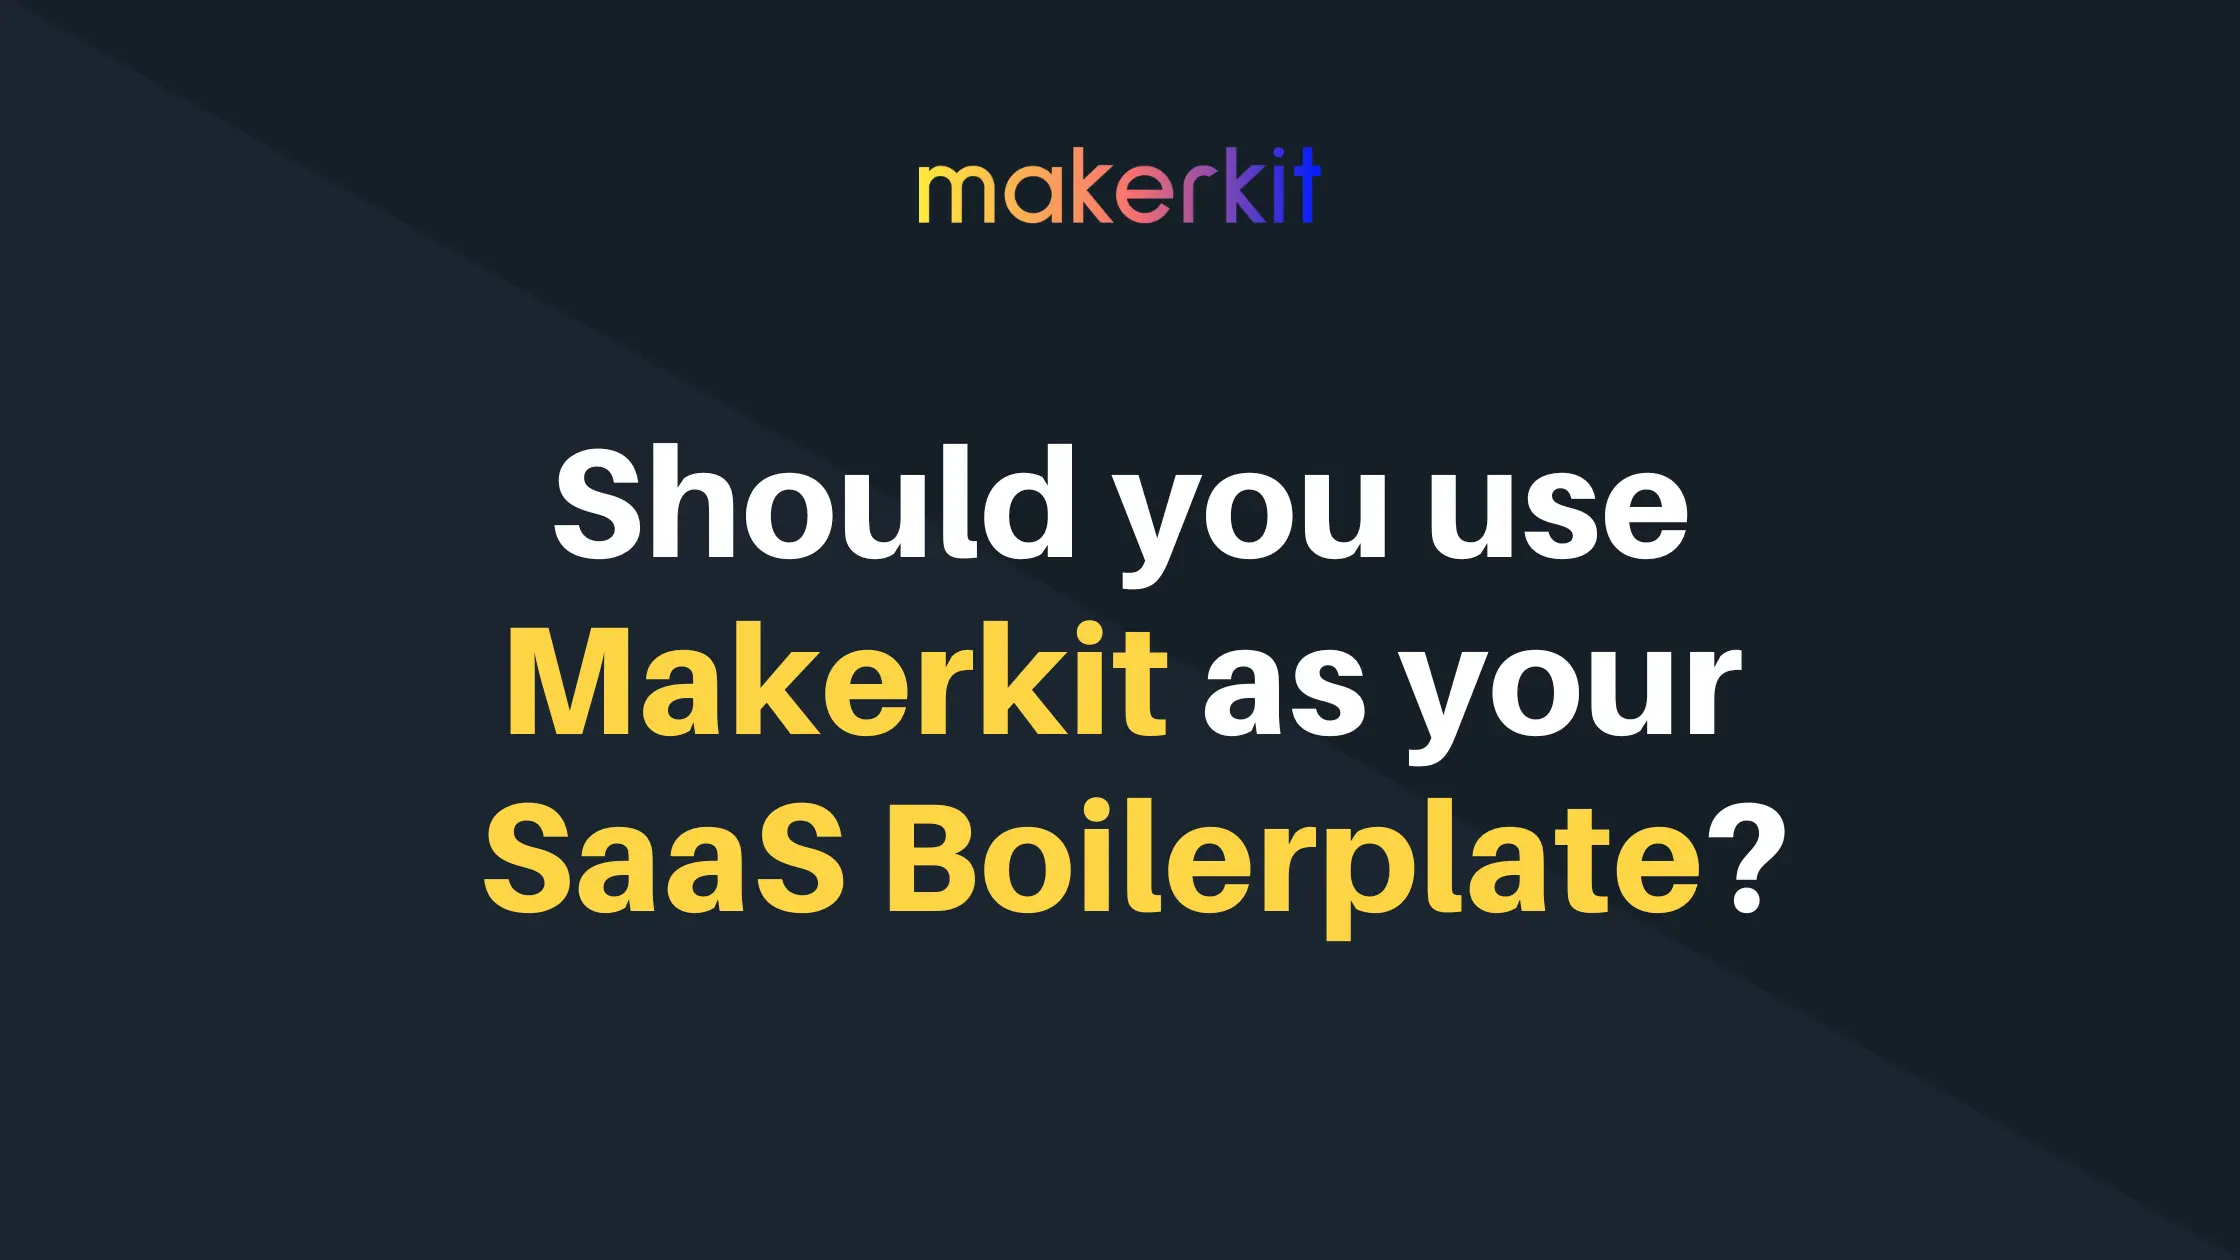 Cover Image for Should you use Makerkit as your SaaS Boilerplate?